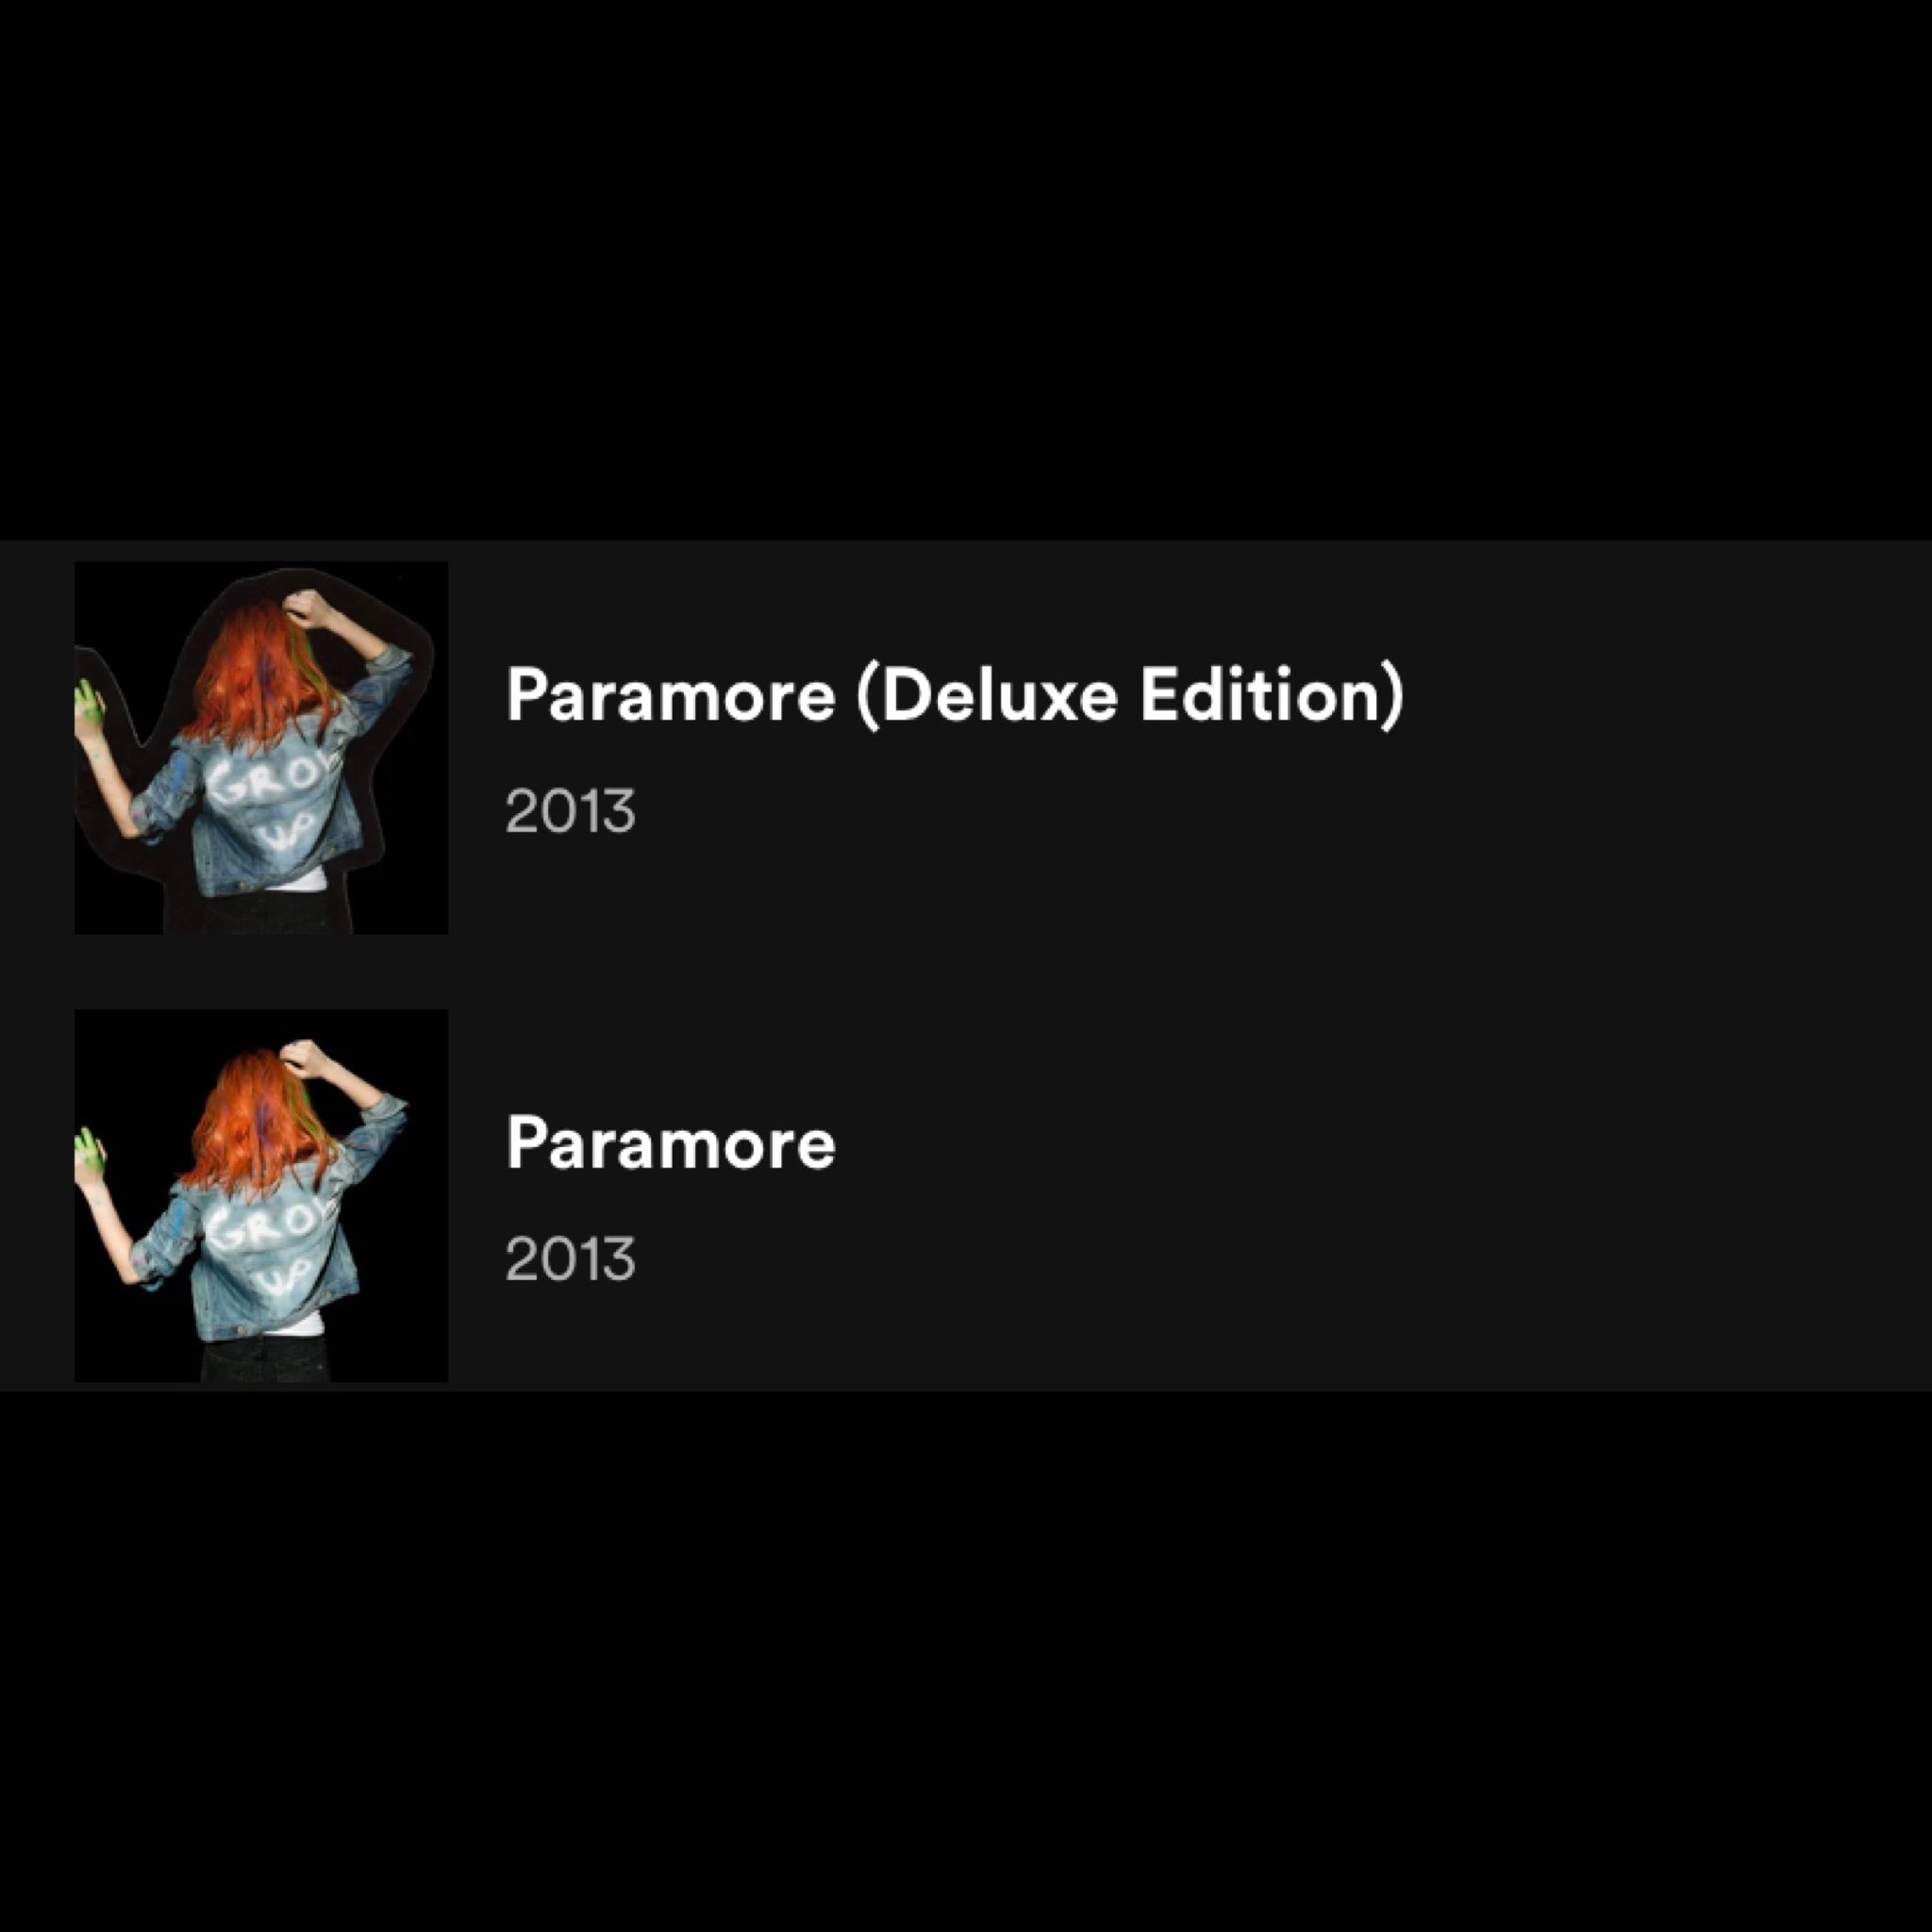 Paramore-Music.com on X: The self-titled album artwork on Spotify